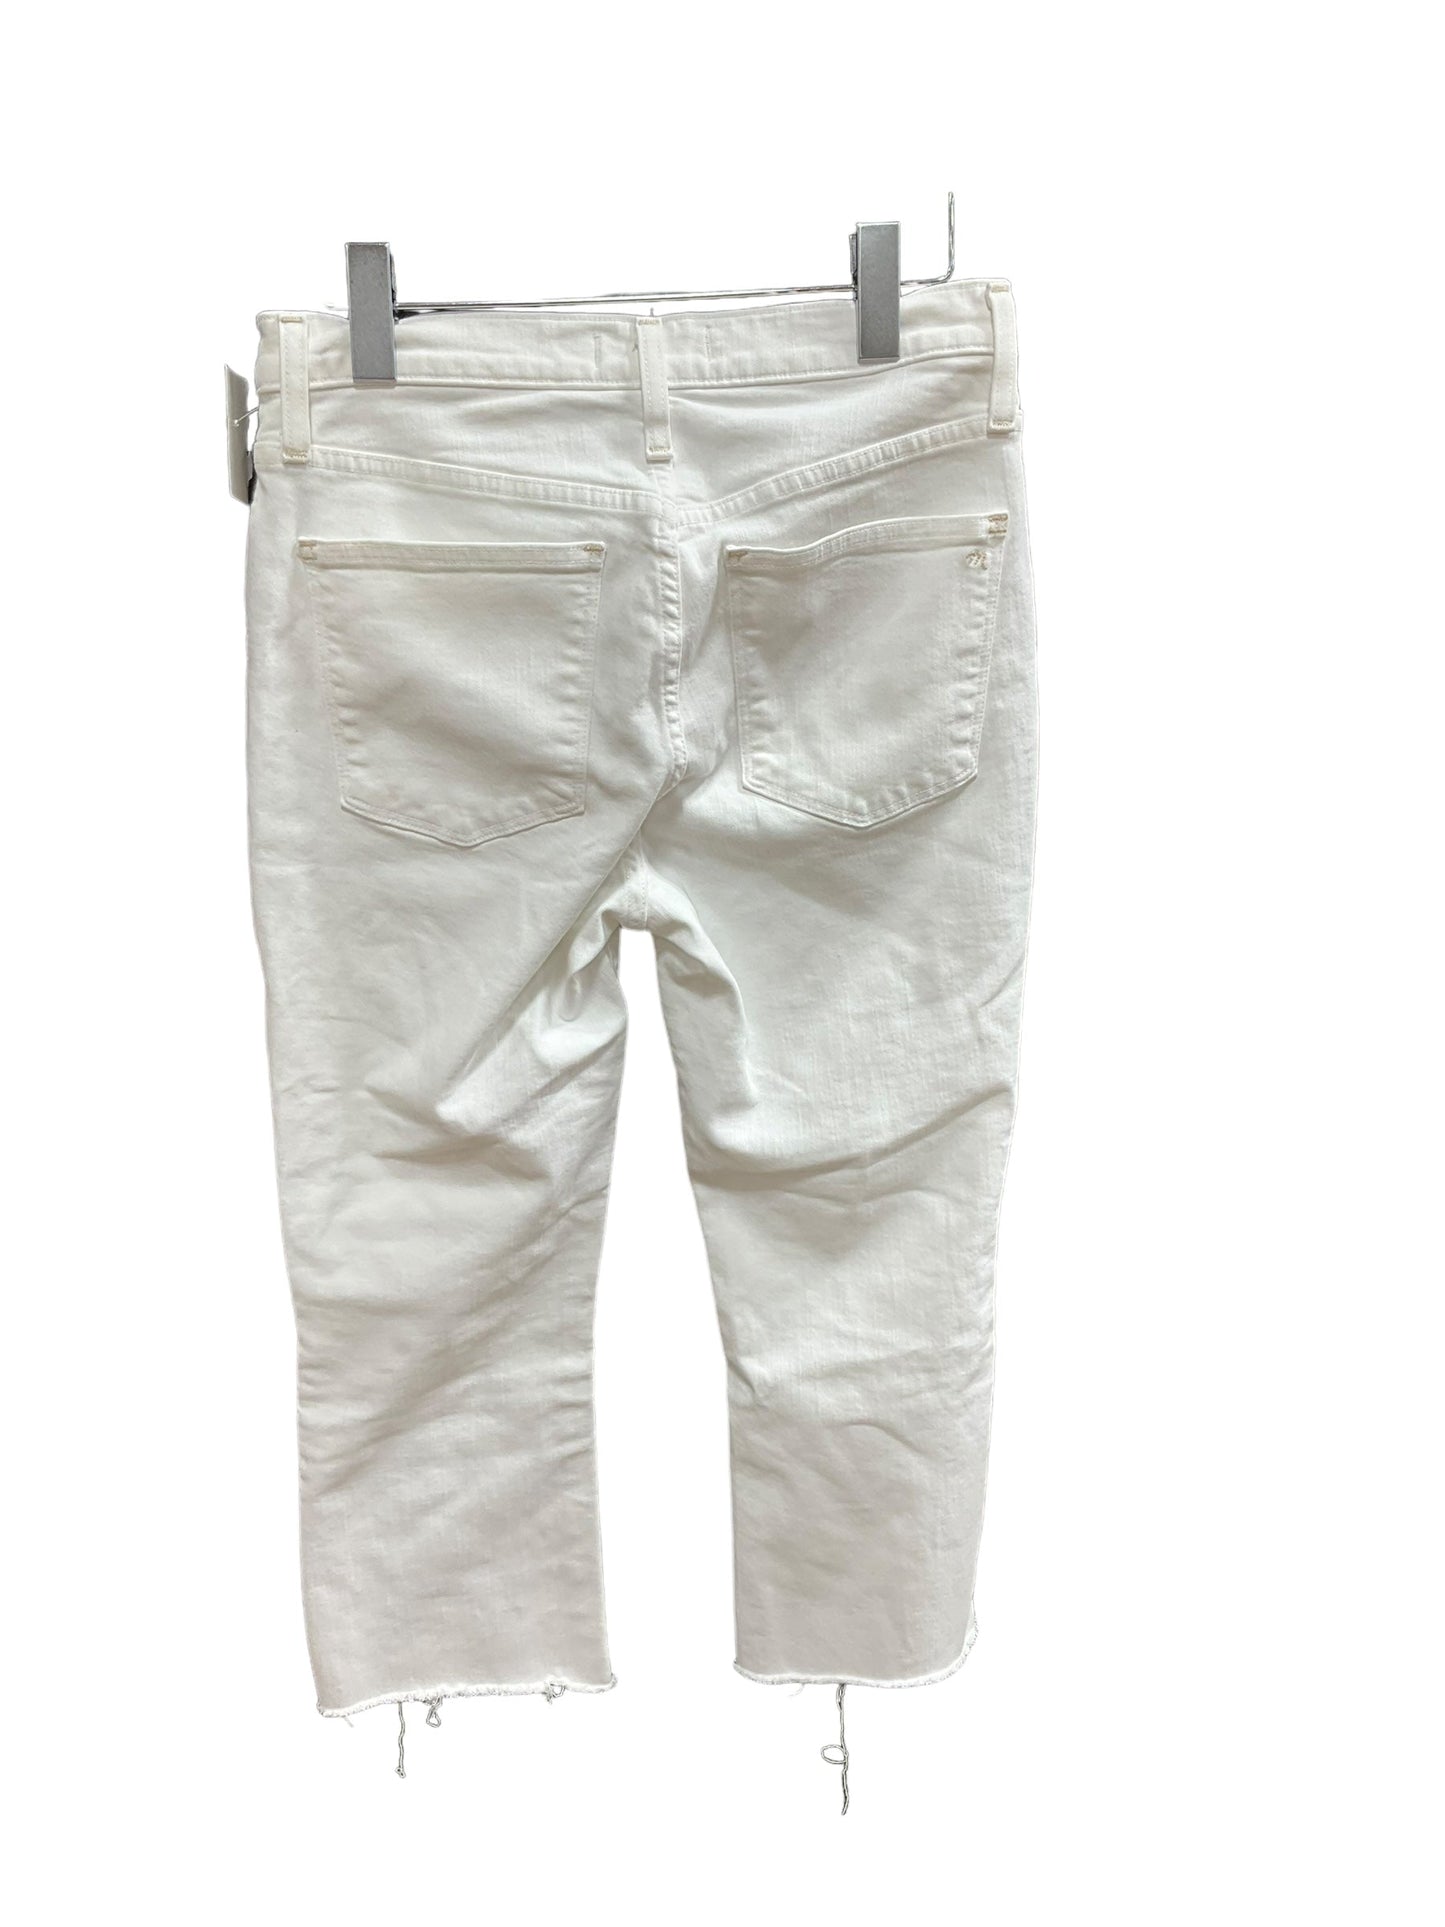 White Jeans Boot Cut Madewell, Size 8